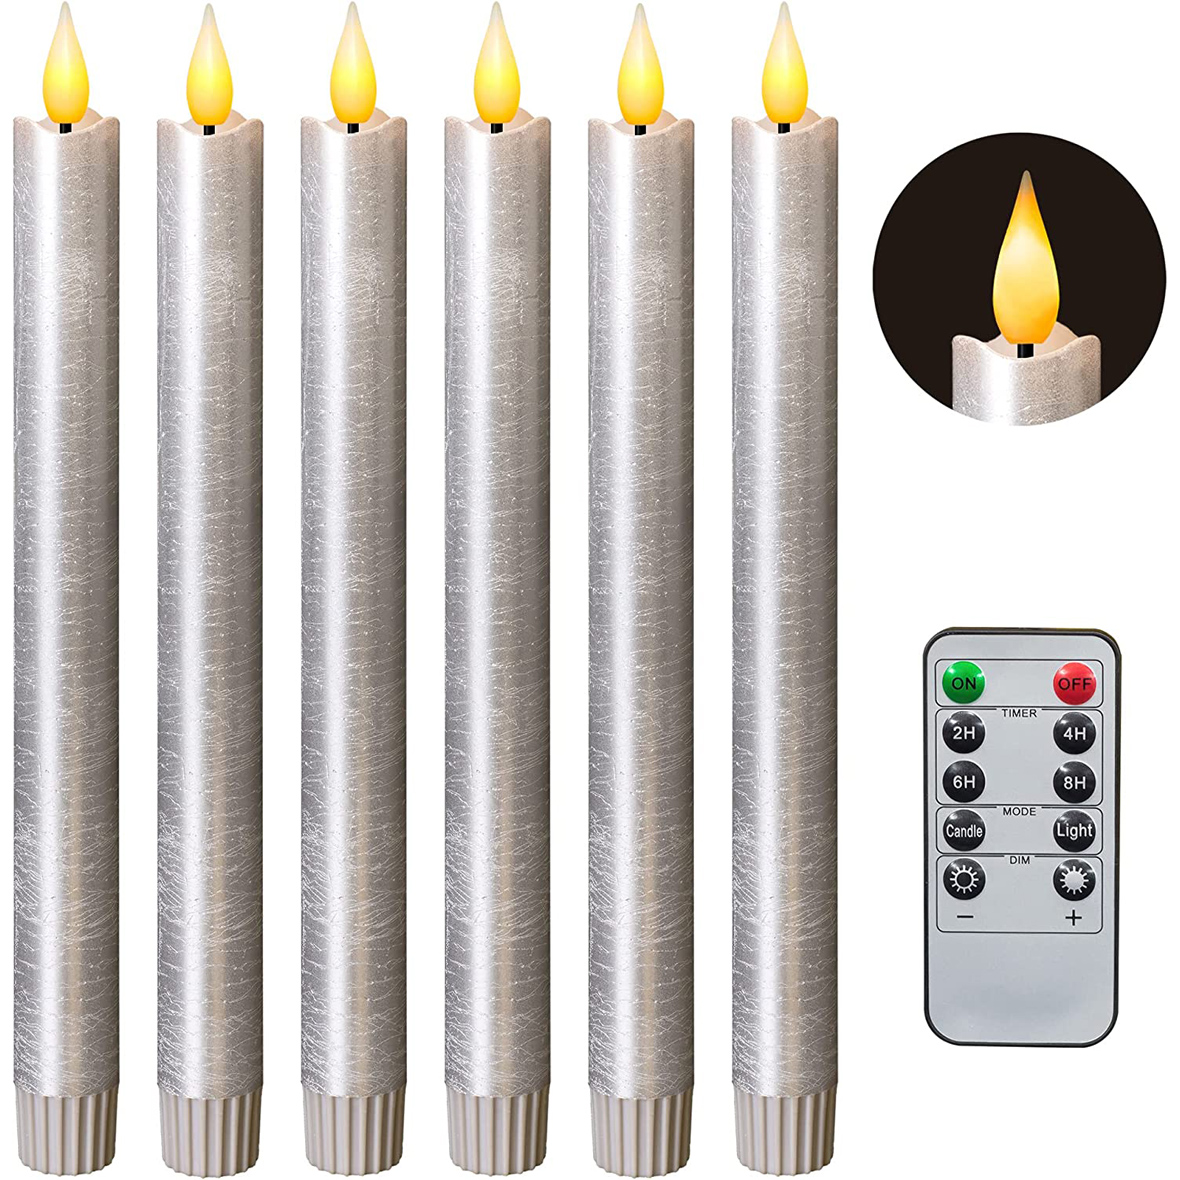 Yongmao Flameless Taper Candles Flickering Battery Operated with 10-Key Remote, Real Wax LED Window Candles Fake Electric Candles 3D Wick Warm Light Pack of 6 for Christmas Home Wedding Decor (Silver)